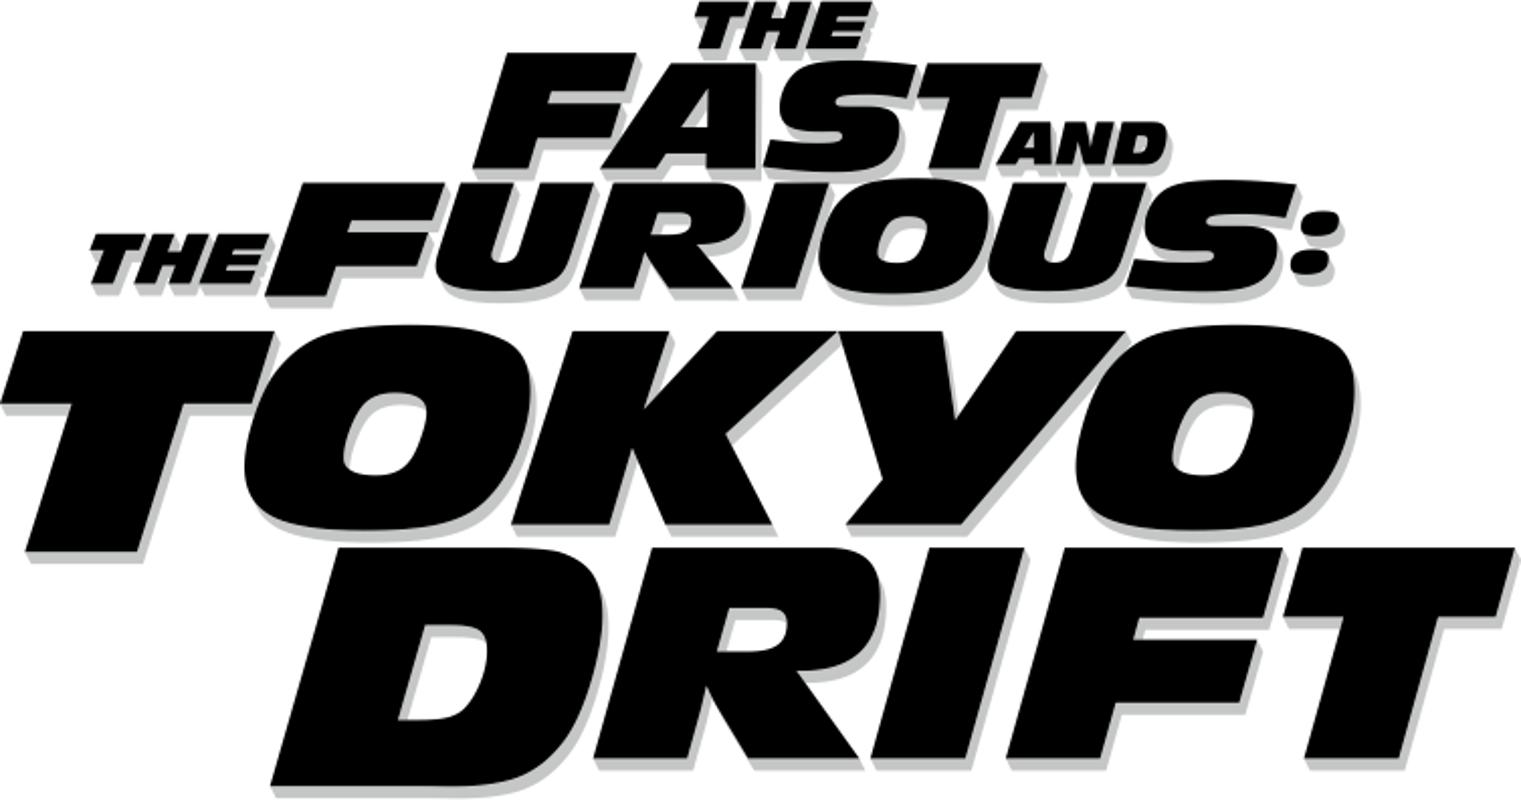 The Fast And The Furious Free Vector Cdr Download - 3Axis.co